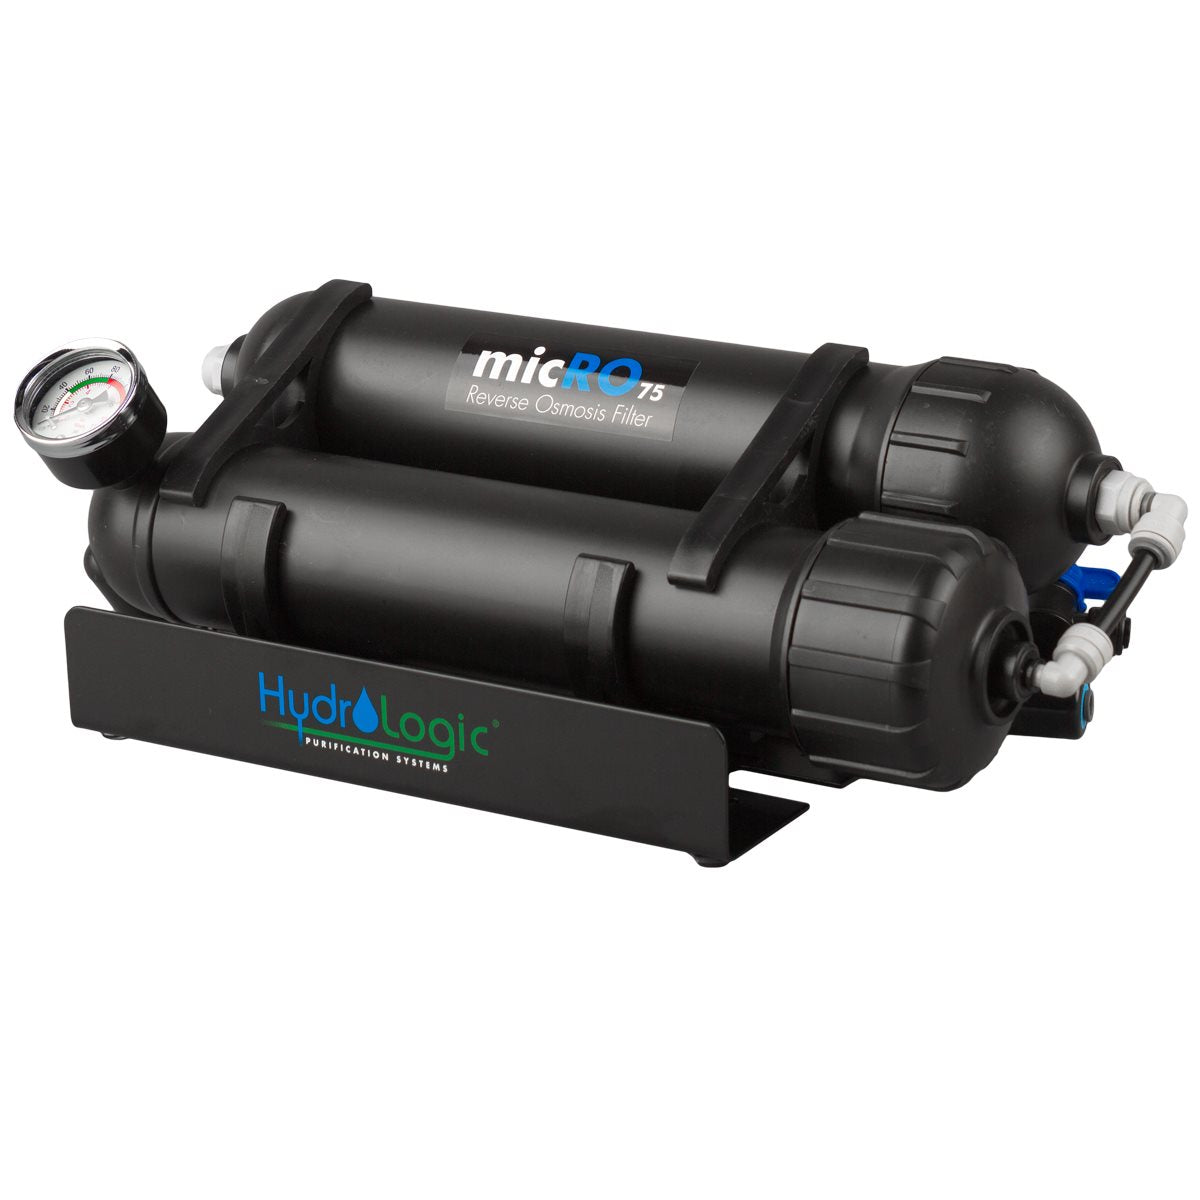 Product Image:Hydro-Logic micRO-75 Reverse Osmosis System